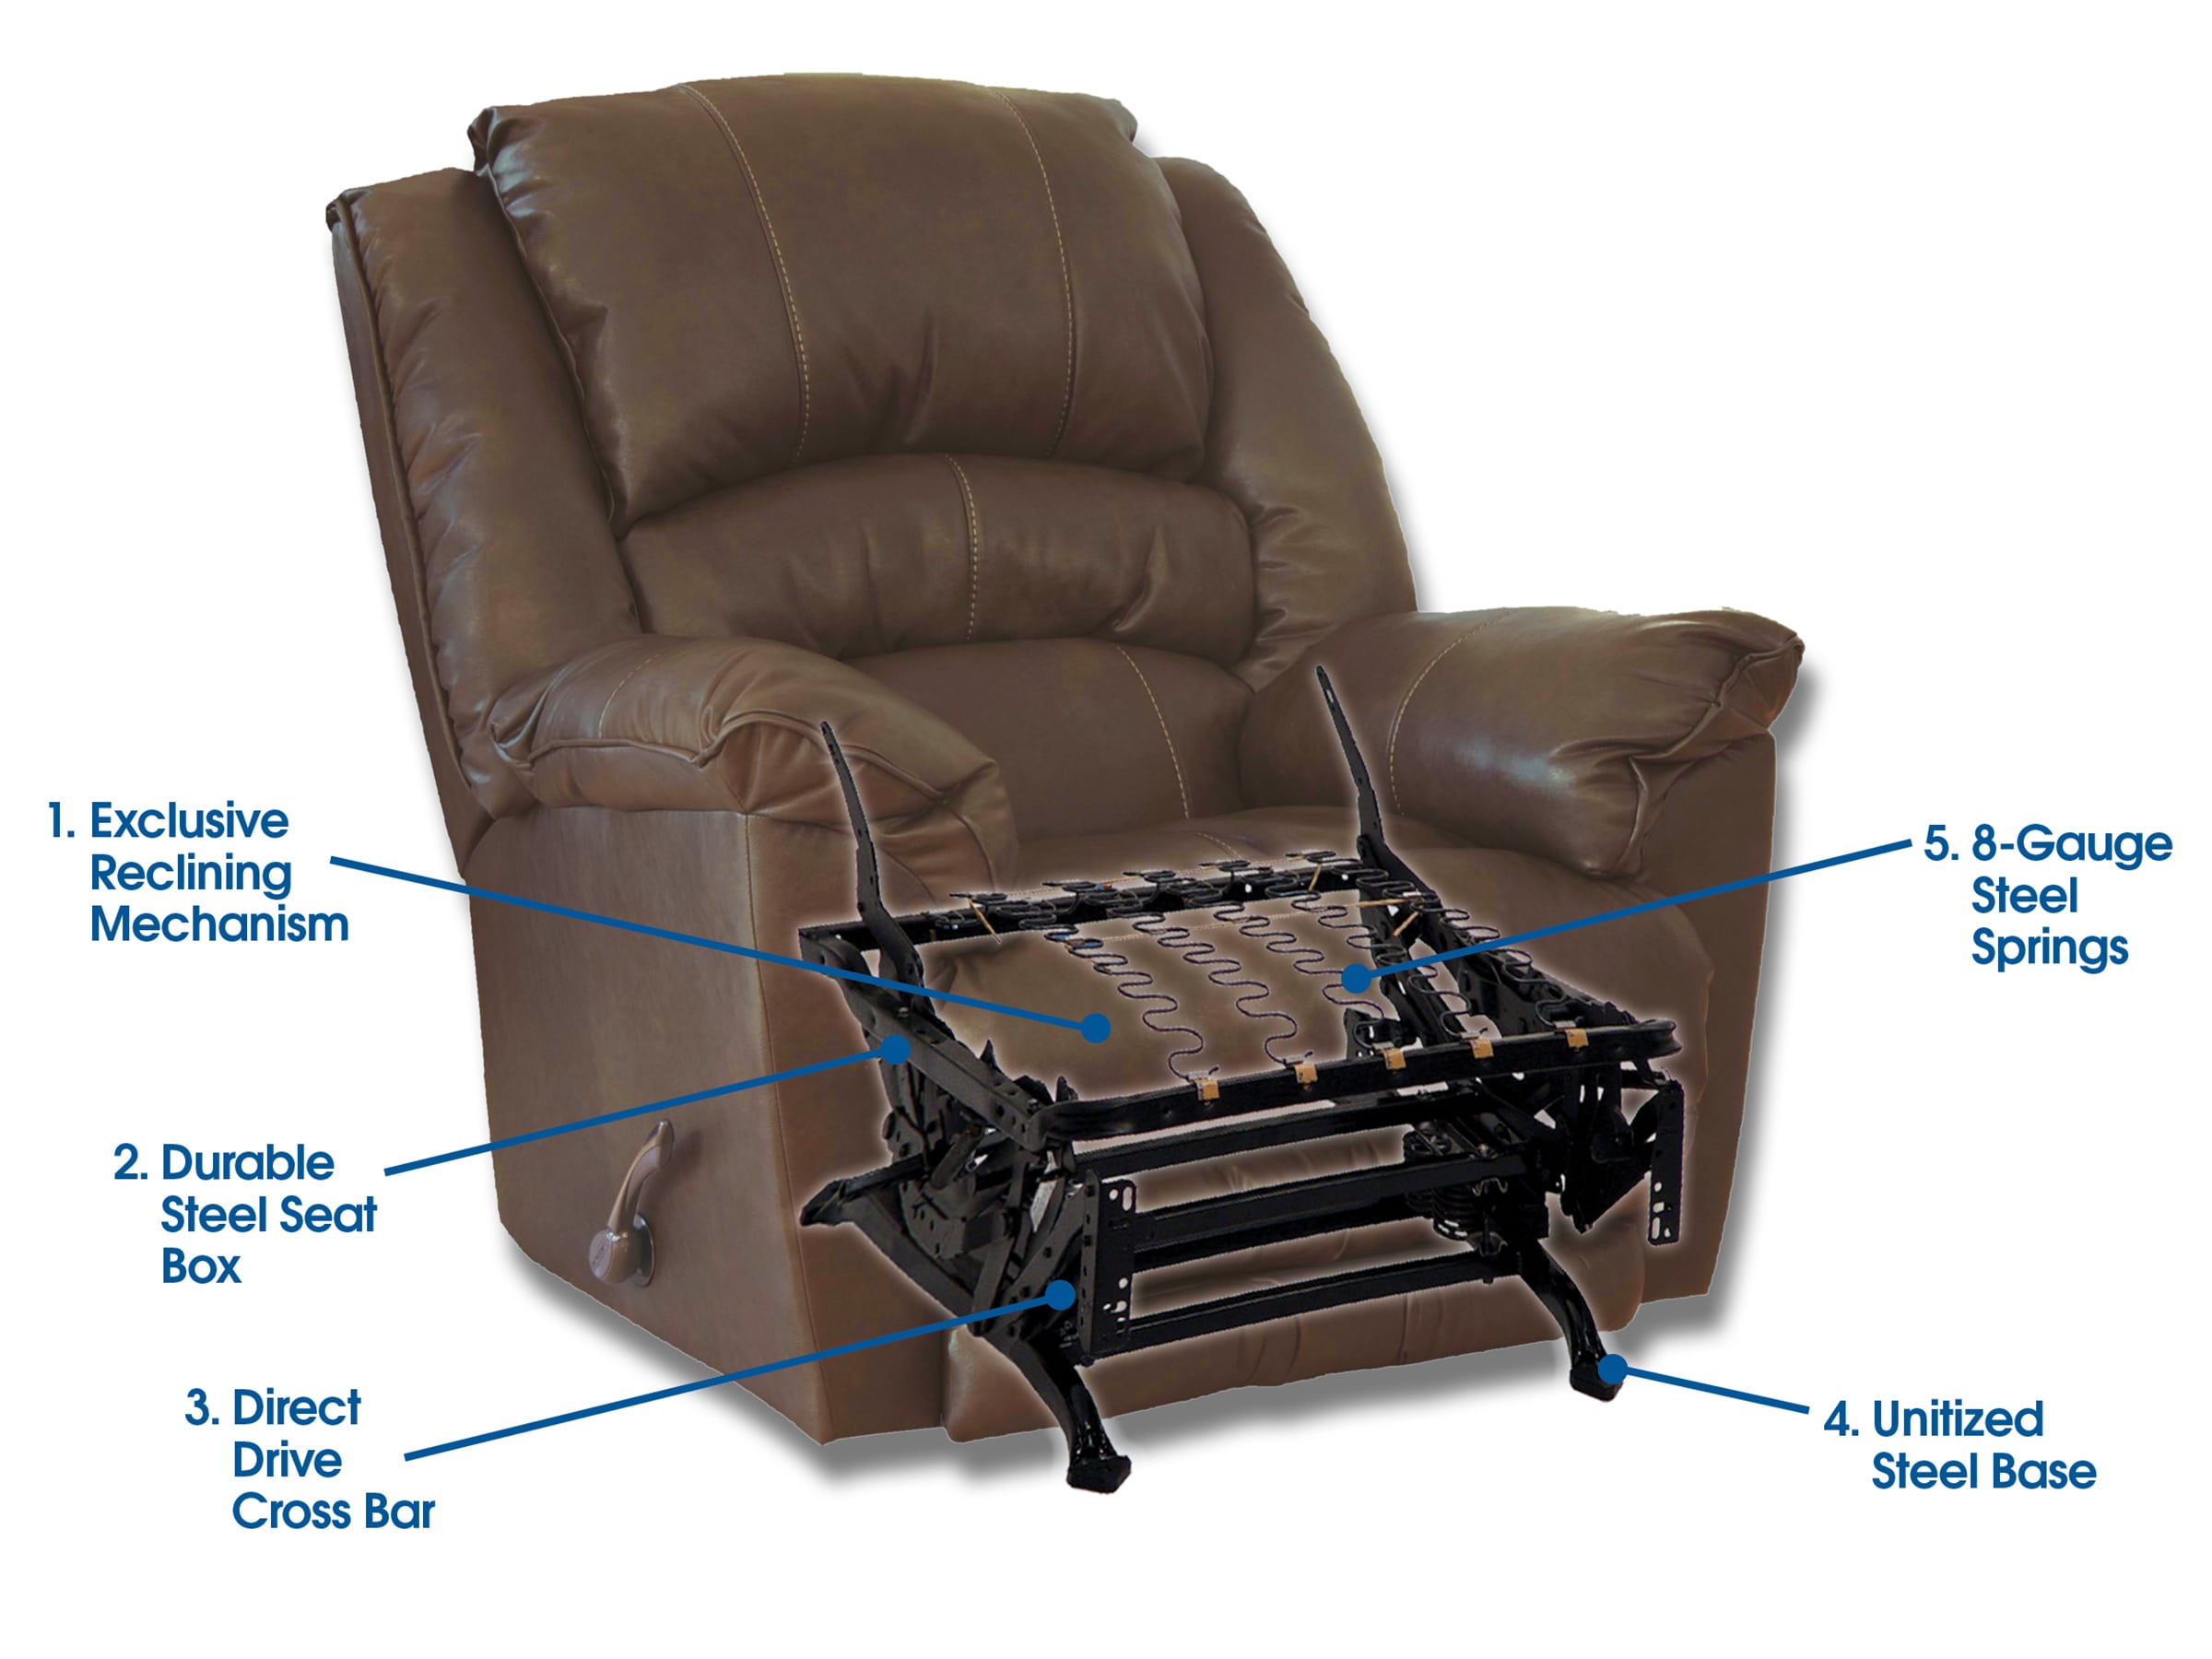 Parts of our recliners